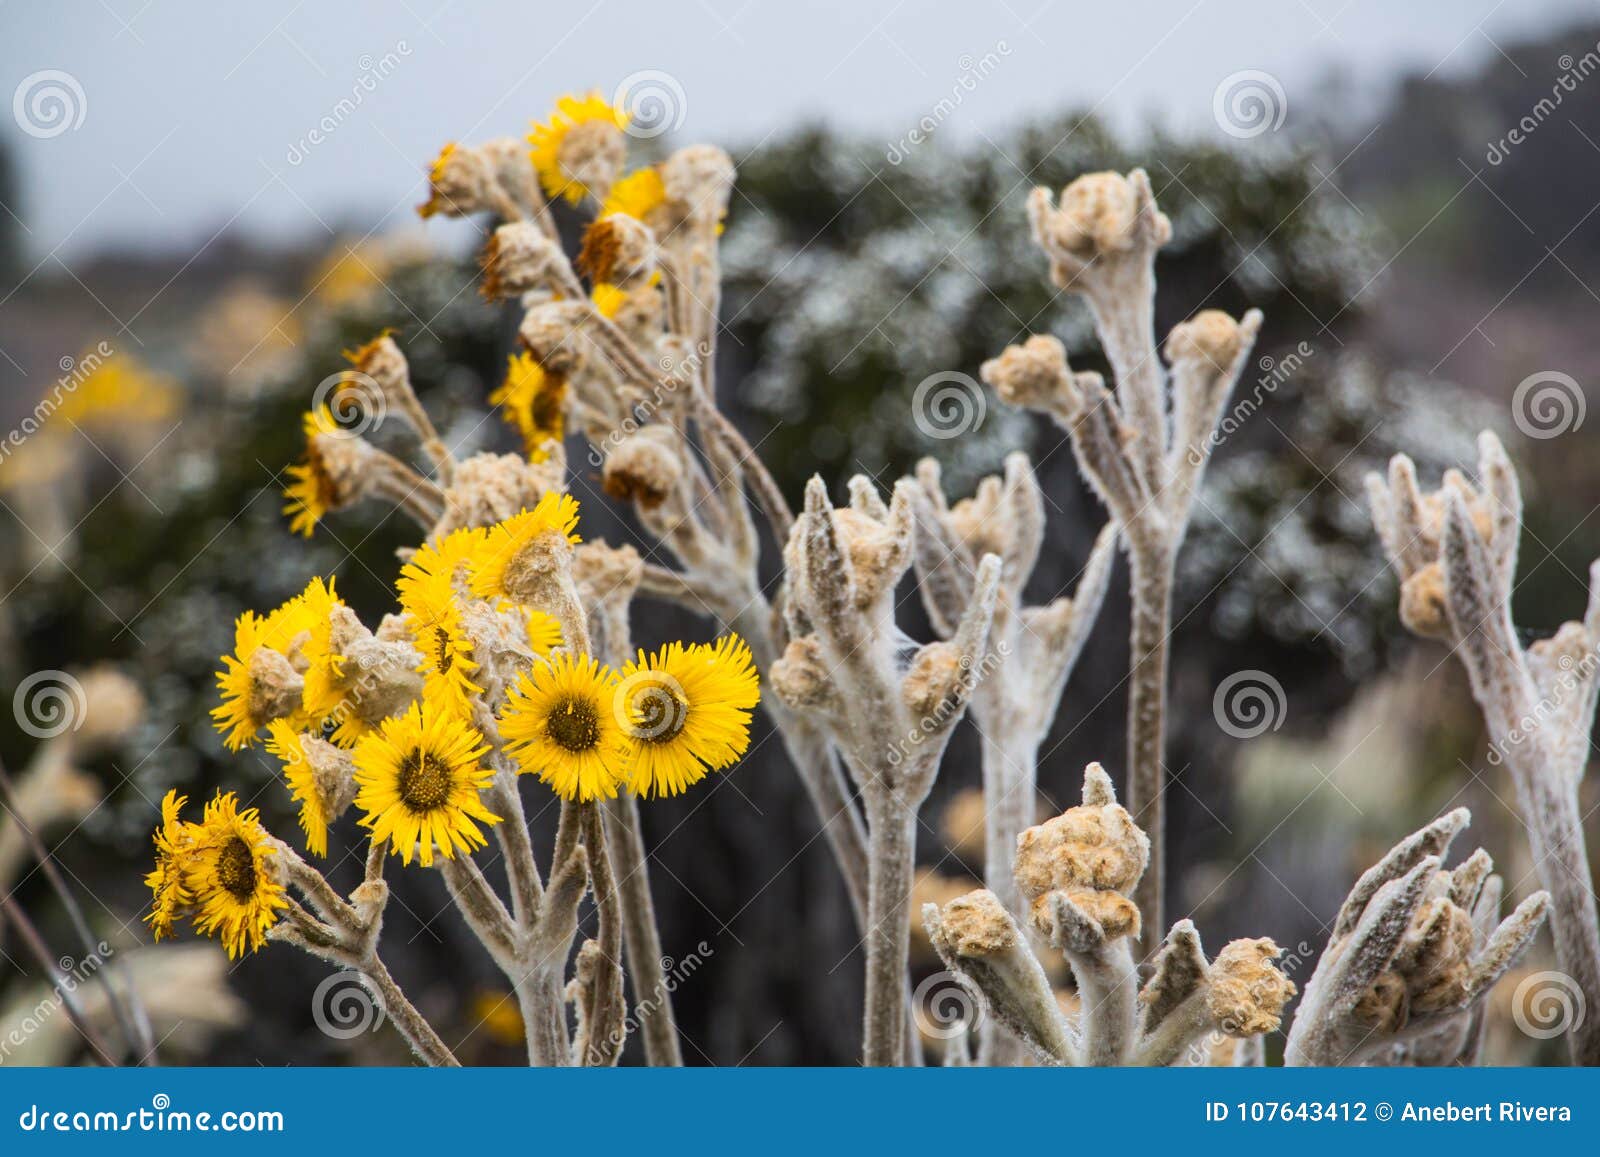 espeletia, commonly known as `frailejones`, is a genus of perennial subshrubs, in the sunflower family